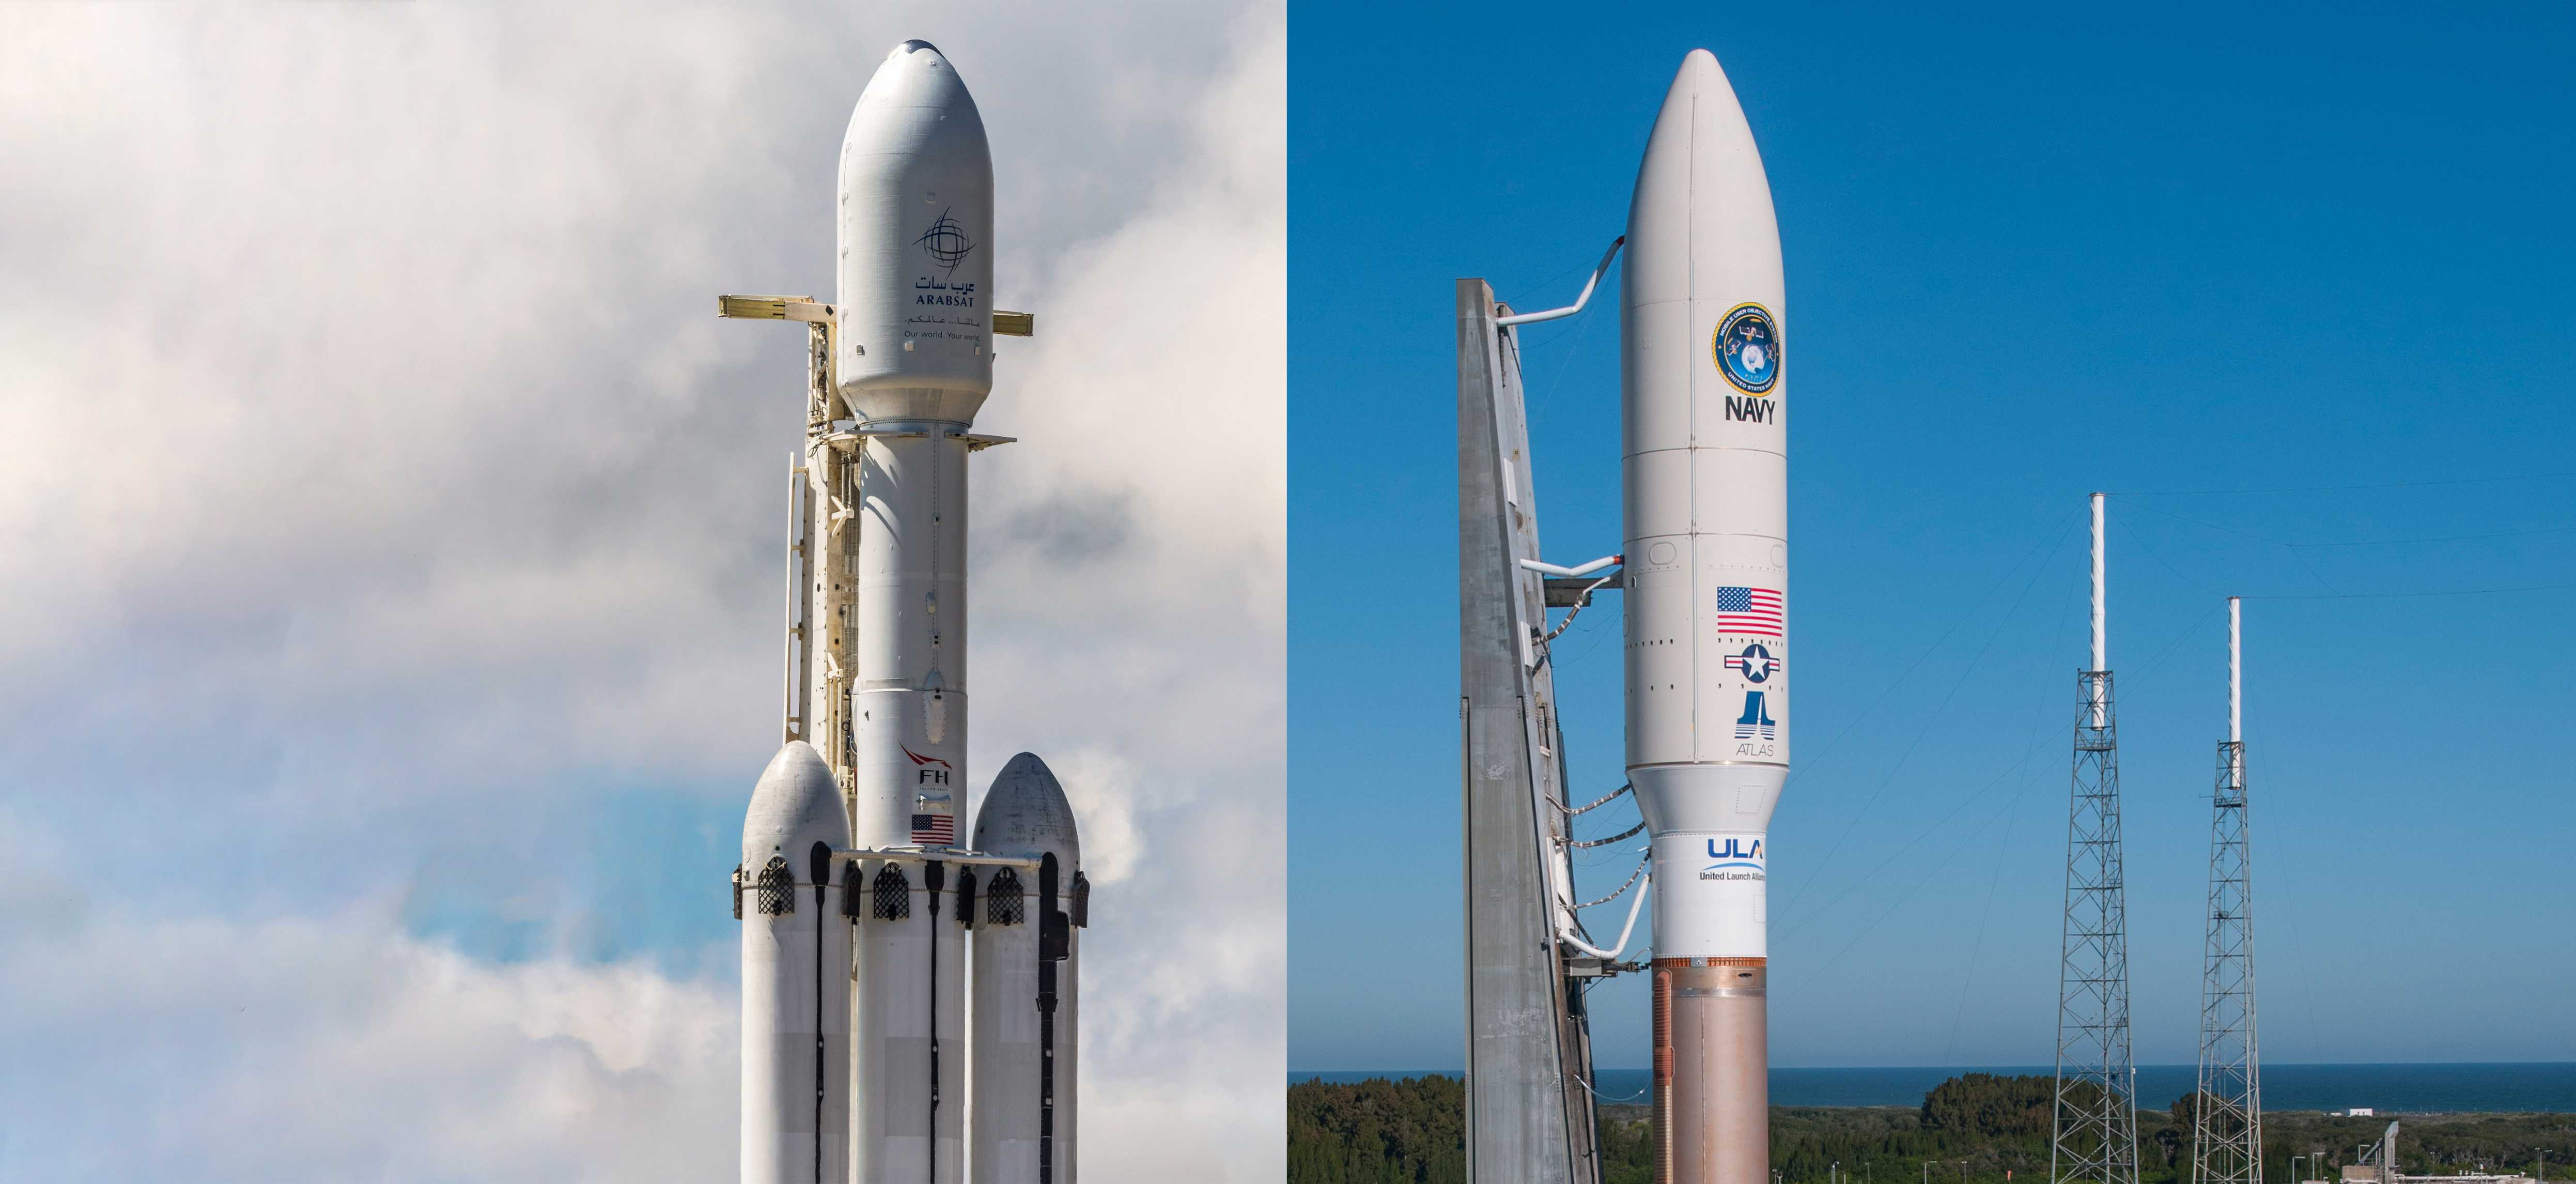 SpaceX may have signed a fairing agreement with ULA supplier RUAG ...